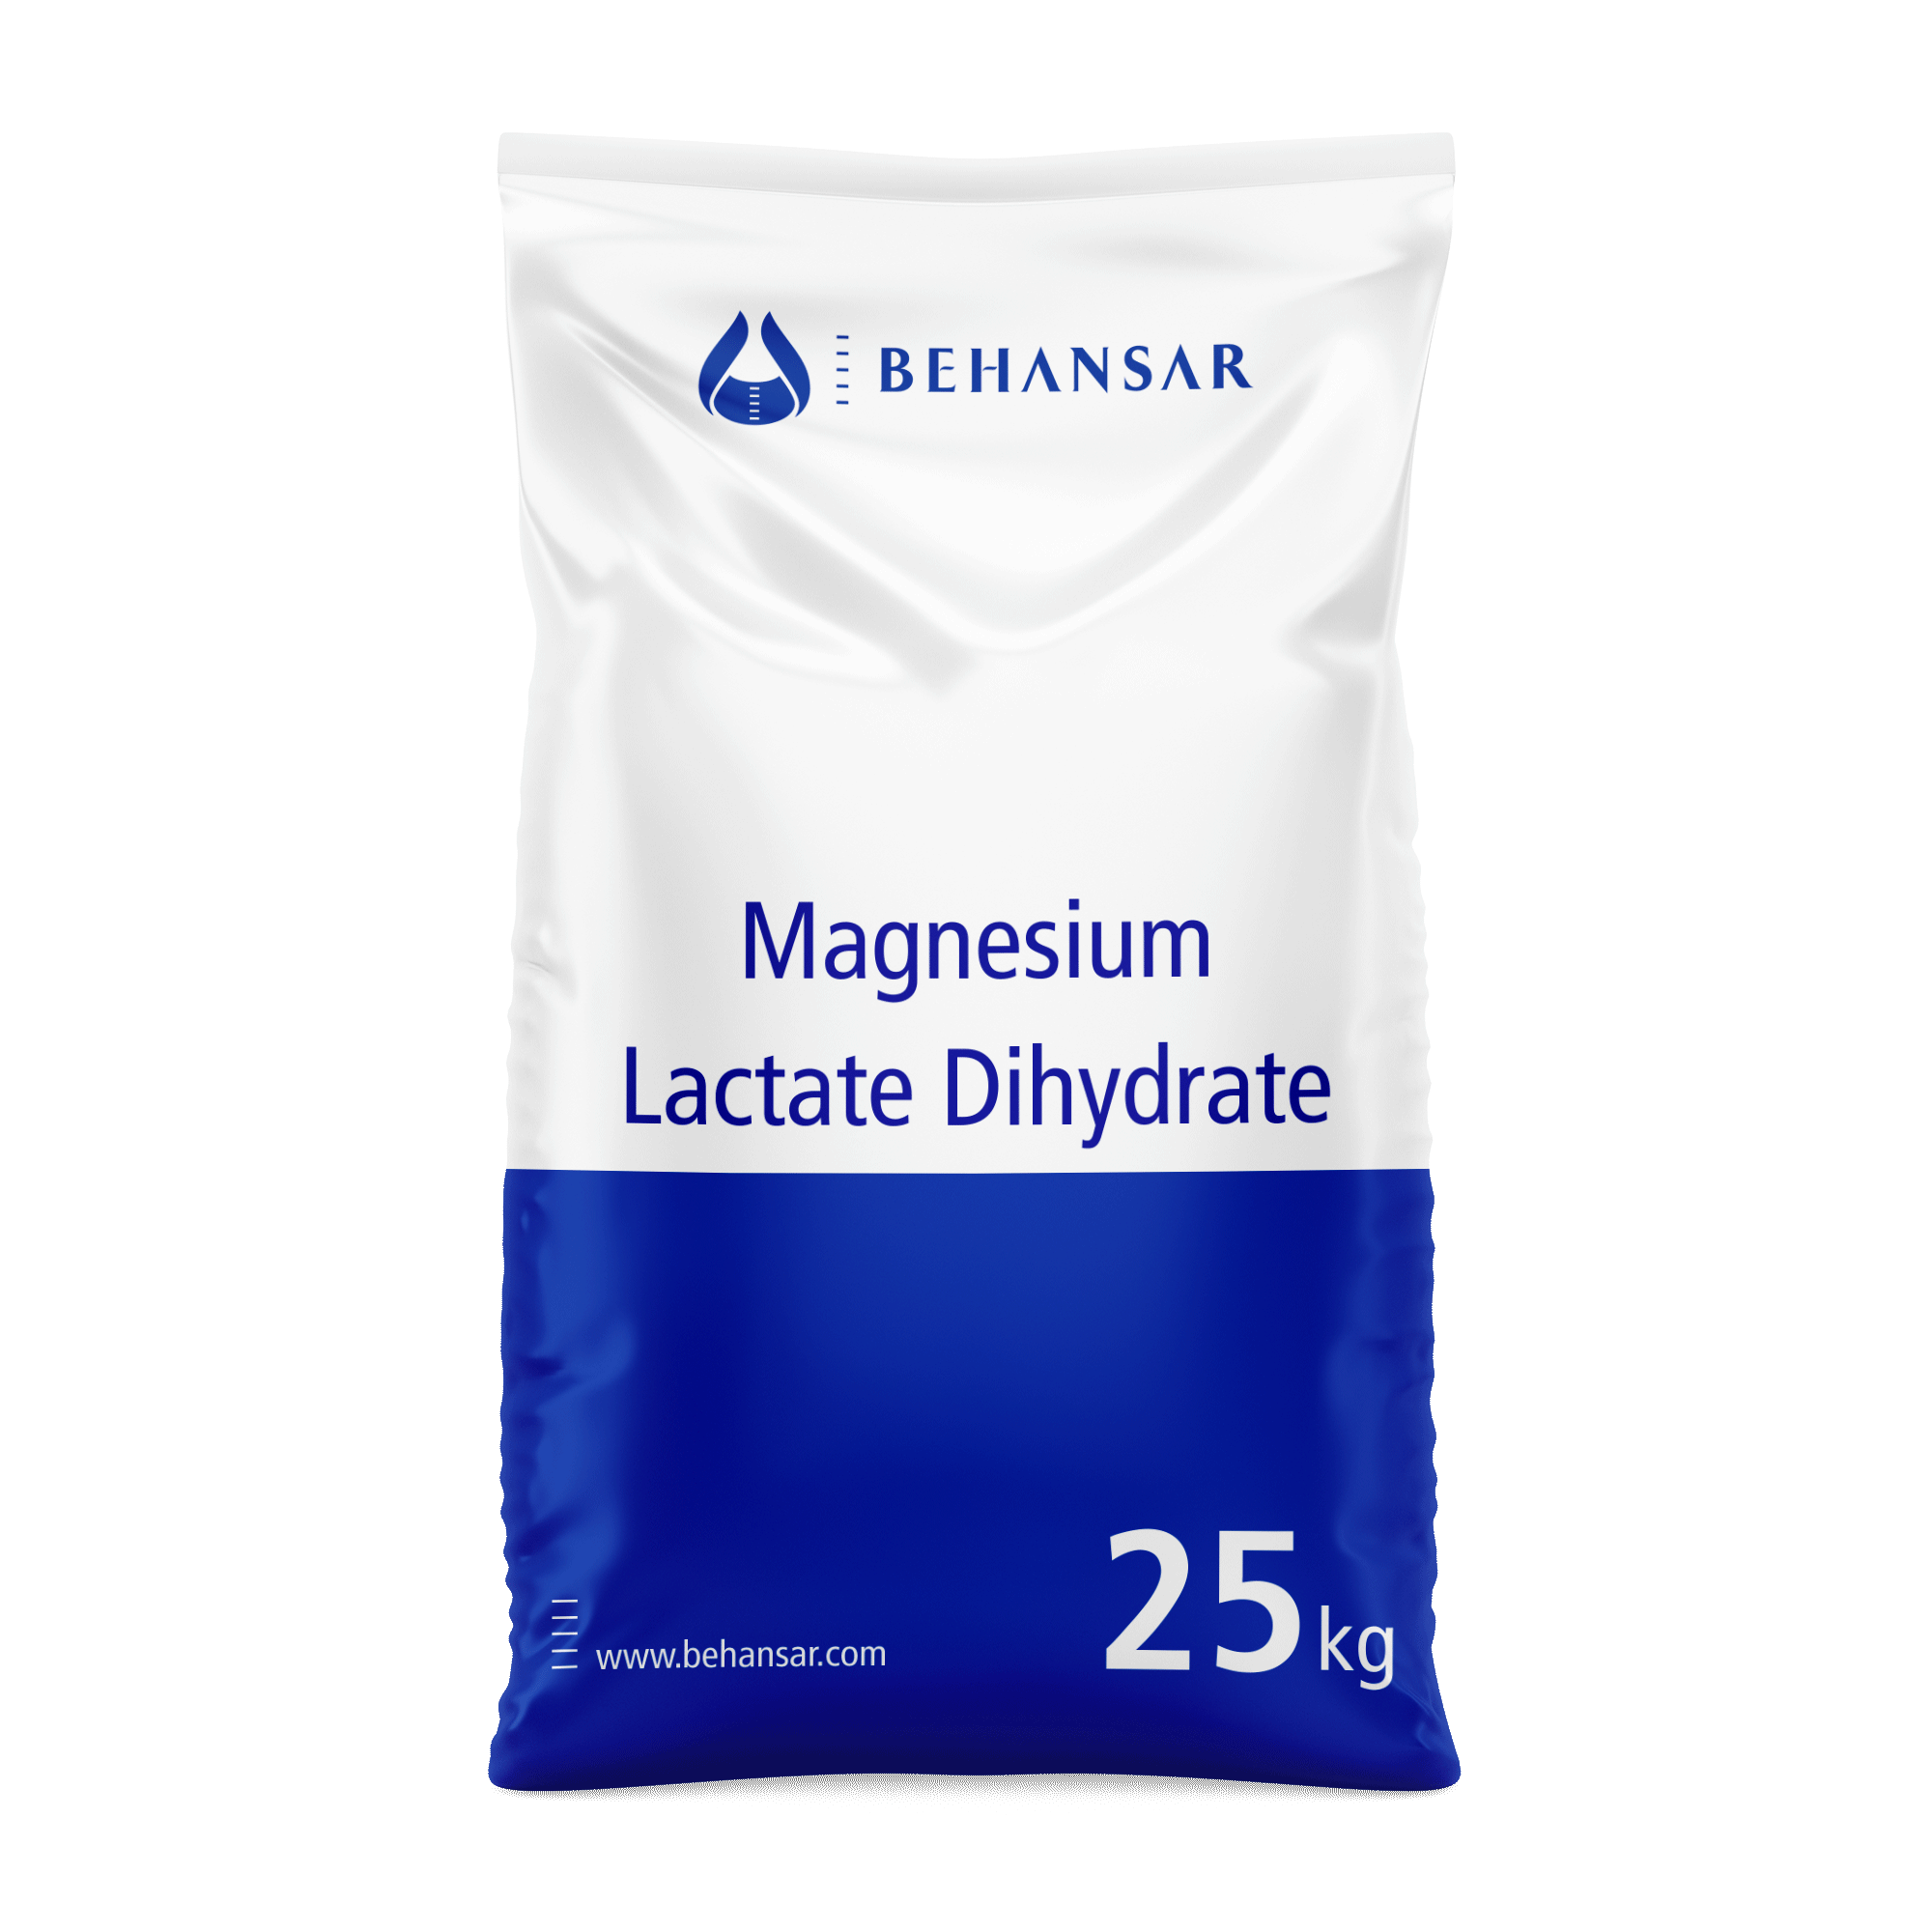 Magnesium Lactate Dihydrate is one of the products of Behansar Co